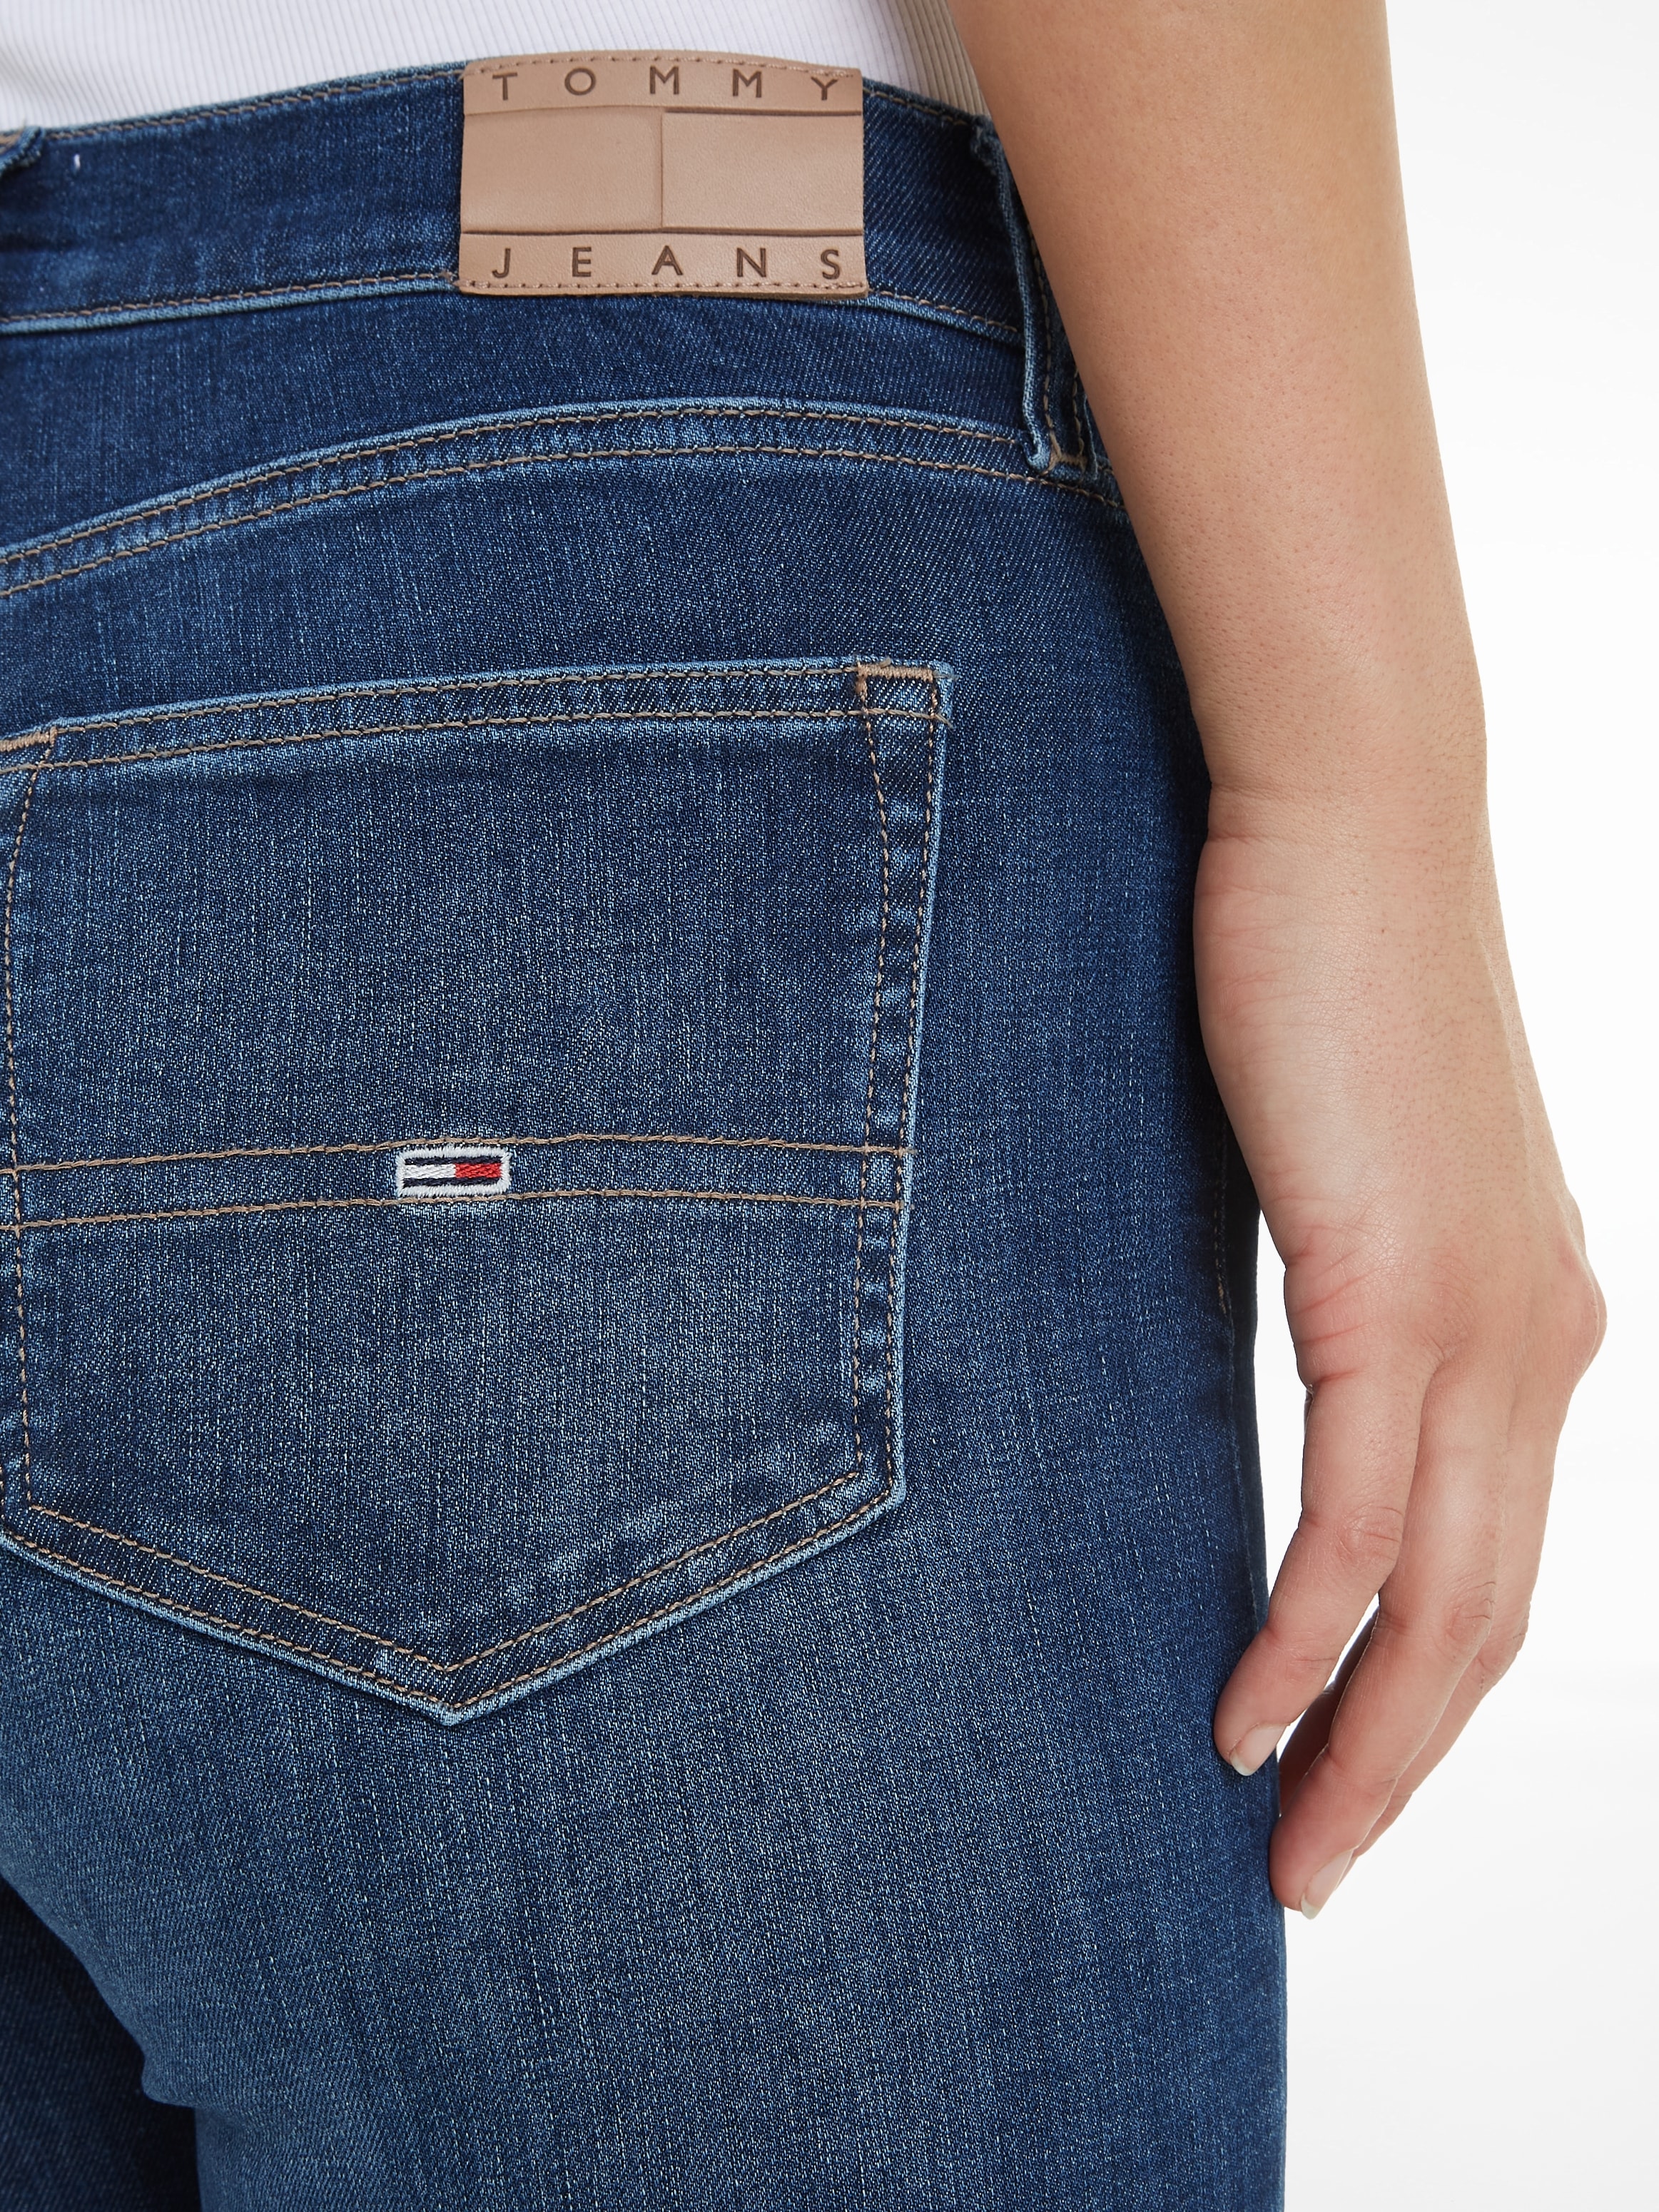 bei Jeans Tommy »Sylvia«, Jeans Markenlabel Bequeme mit ♕